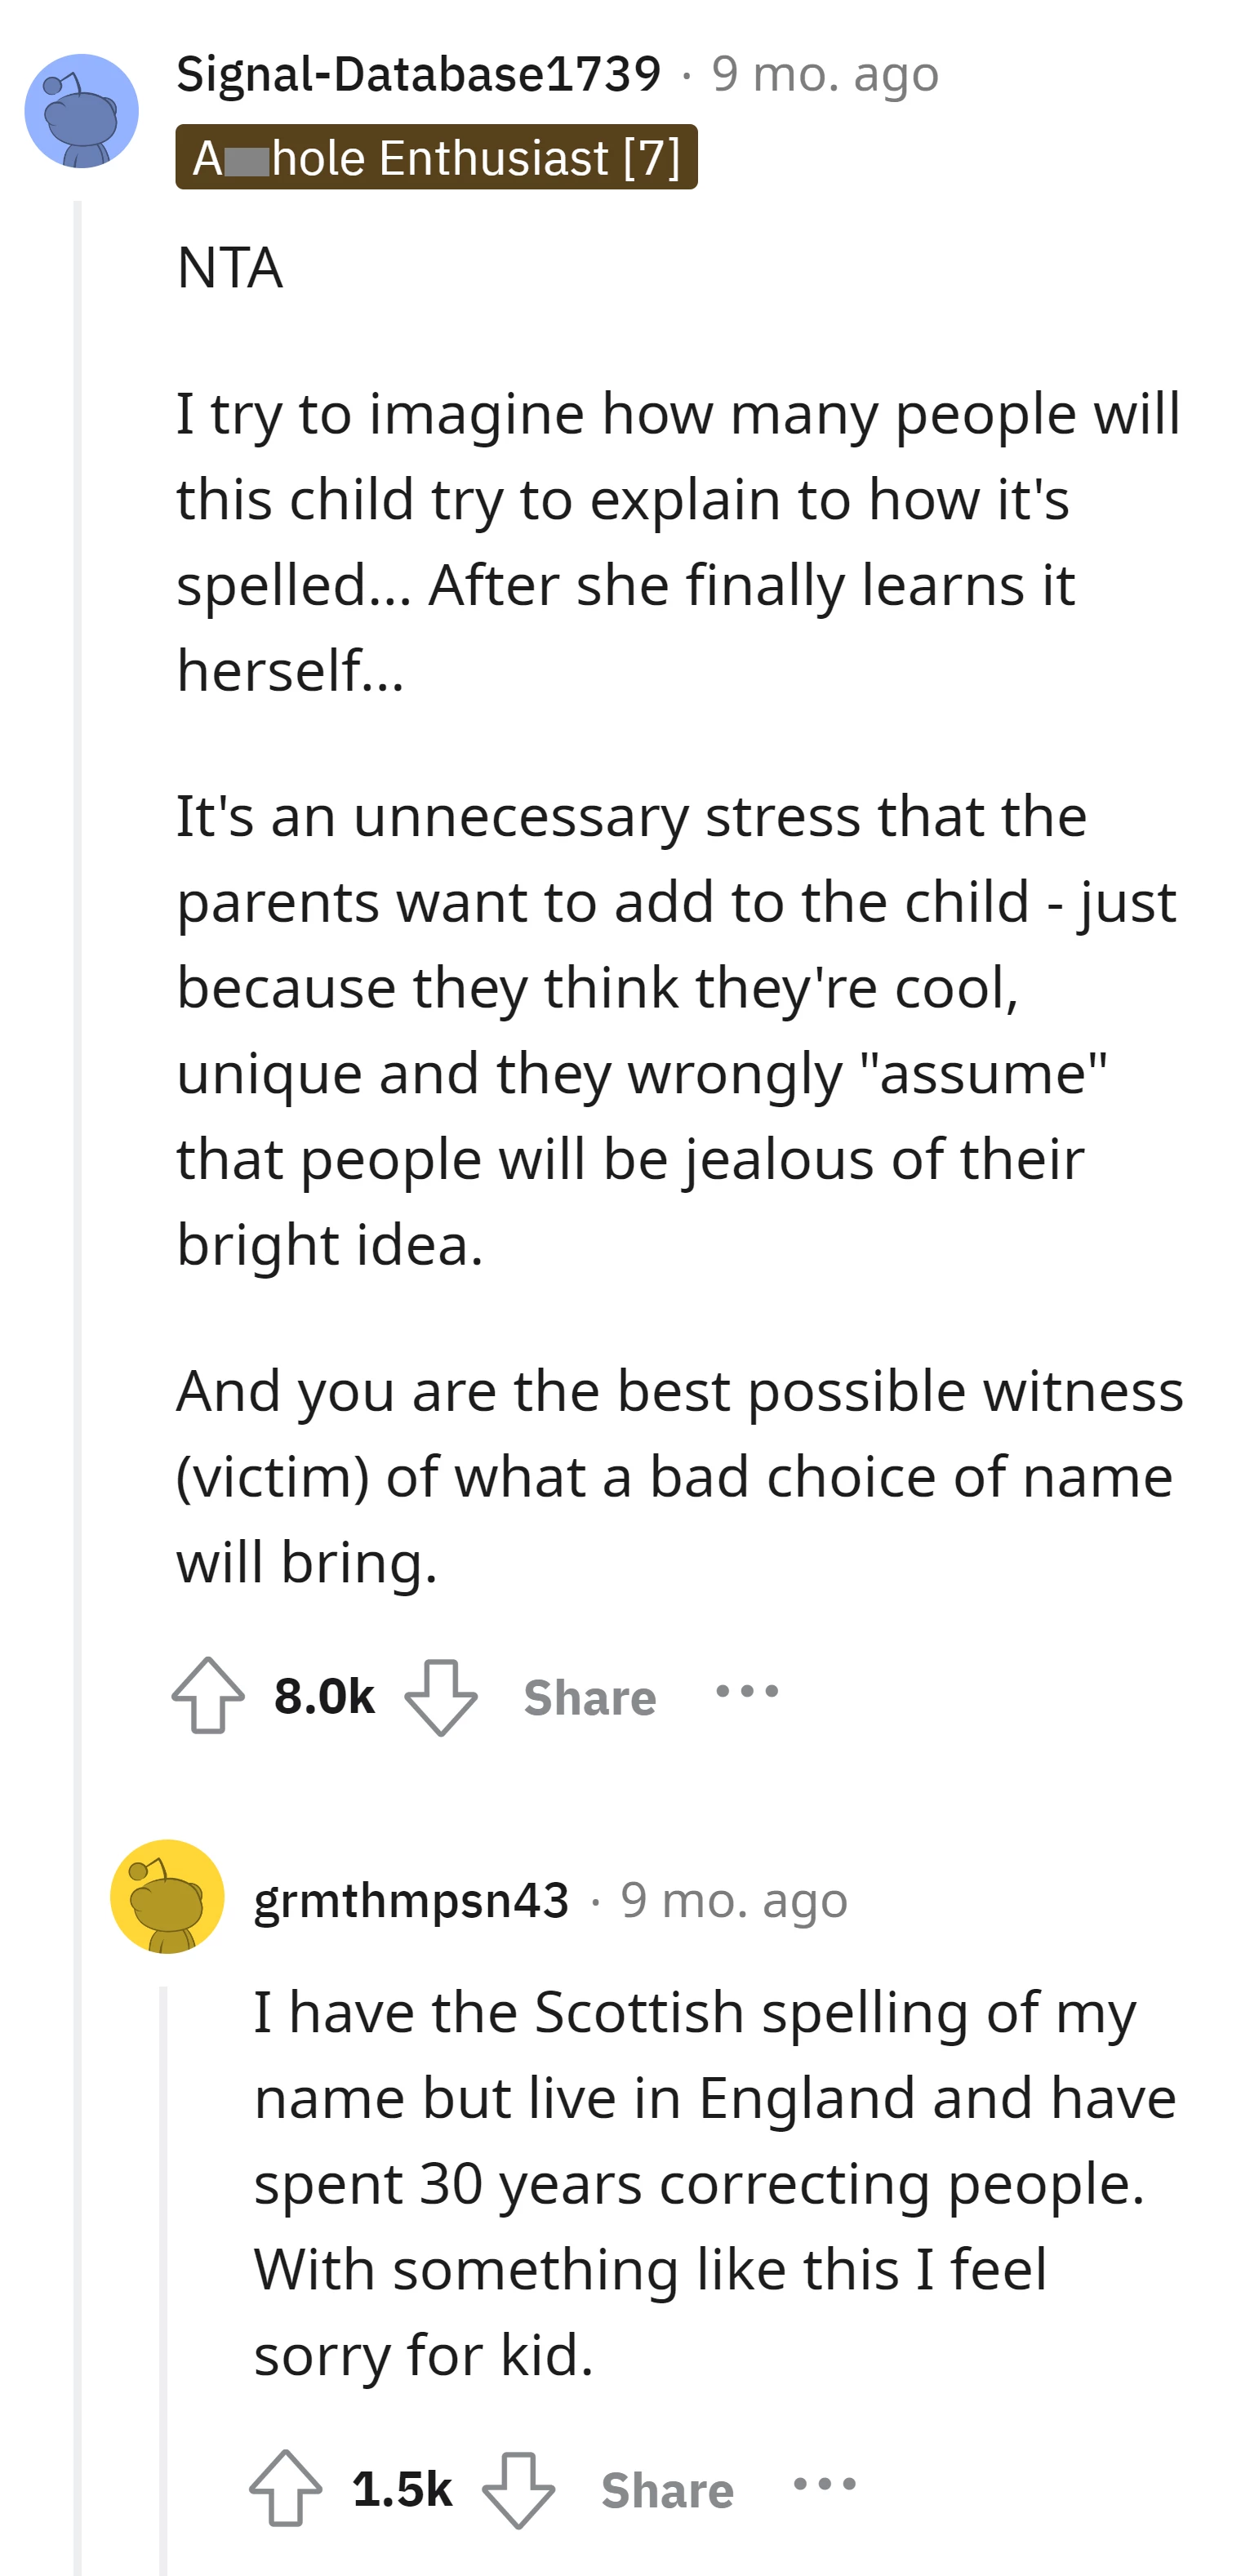 The unconventional name "Krxstxl" will bring potential stress to the child